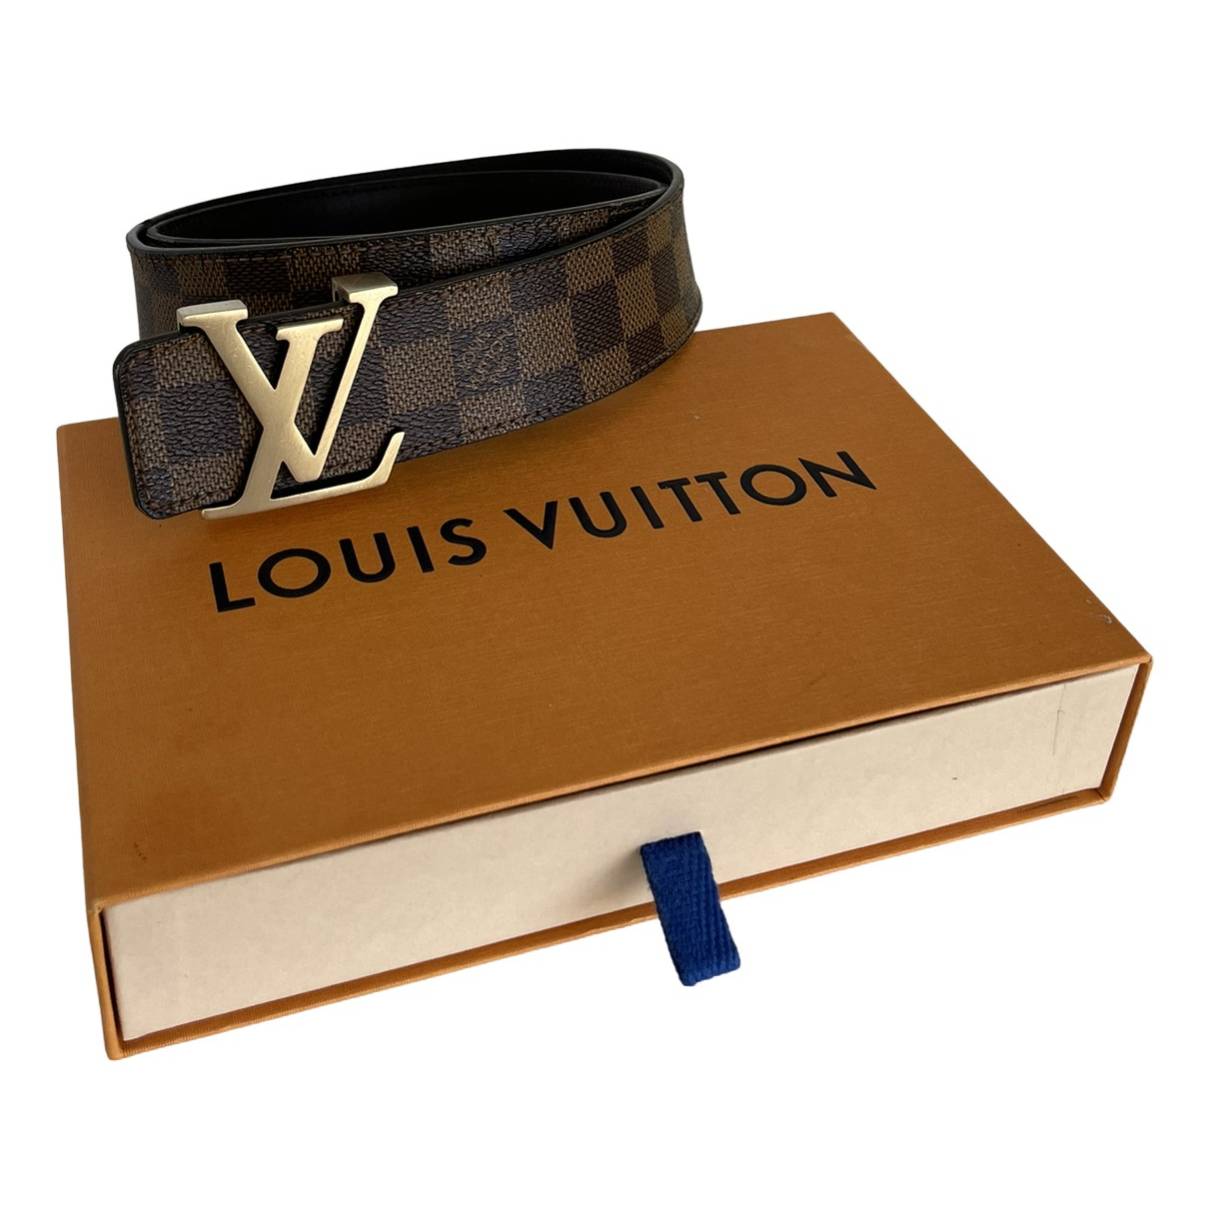 Louis Vuitton - Authenticated Shape Belt - Leather Brown for Men, Very Good Condition